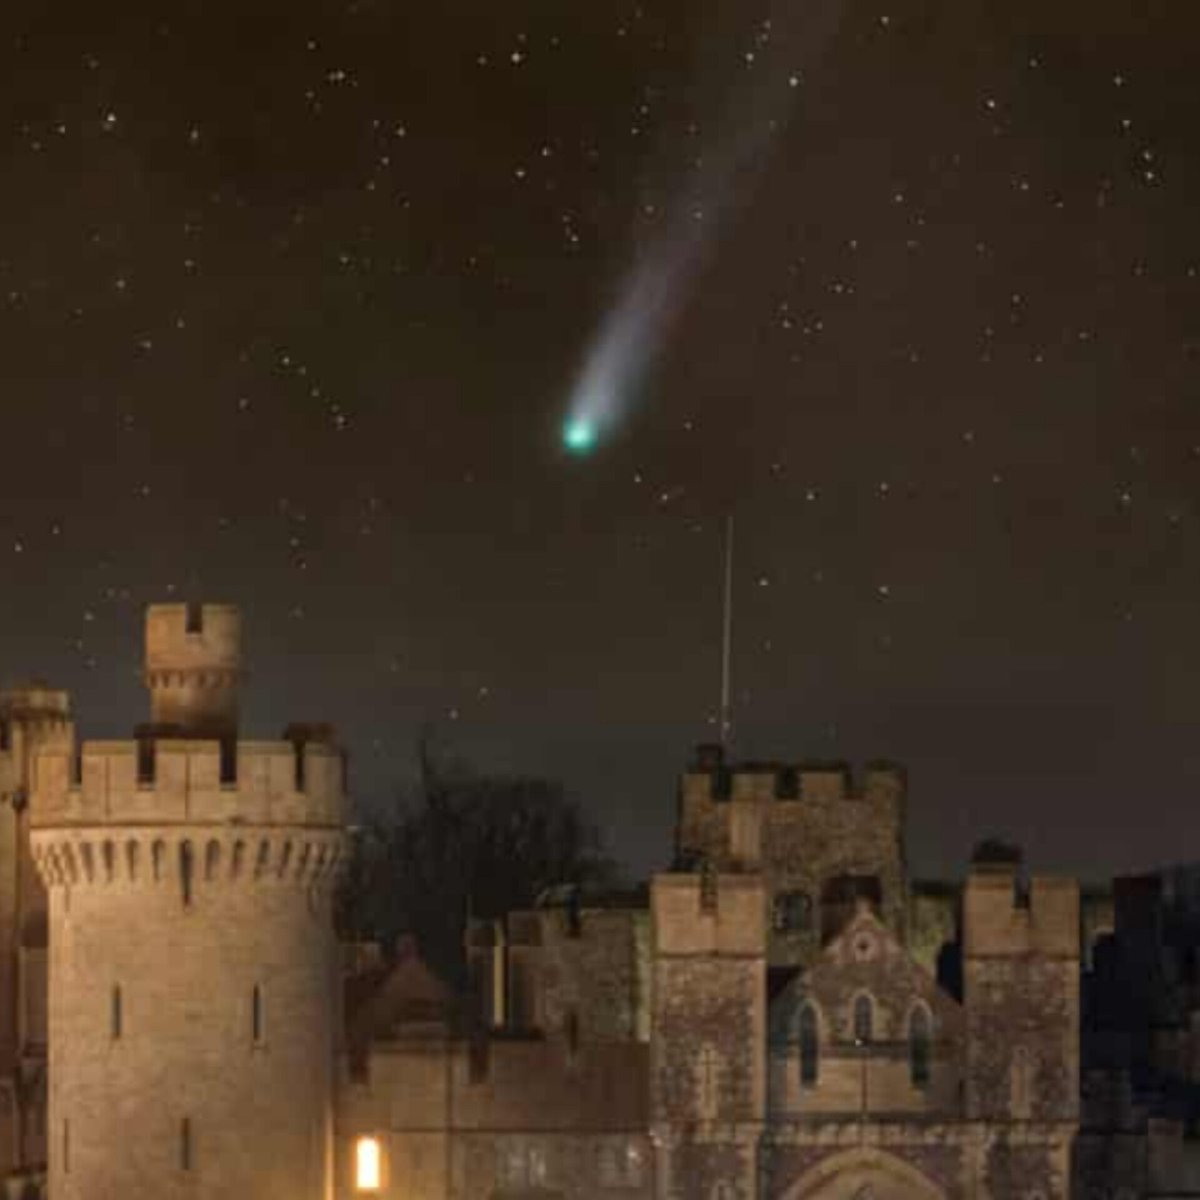 Get ready to spot the 'Devil Comet'! 12P/Pons-Brooks, larger than Everest, may soon be visible to the naked eye as it swings by. Astronomers predict it'll shine even brighter in the coming weeks.

Read more on shorts91.com/category/scien…

#Comet12P #DevilComet #Comets #12PPonsBrooks